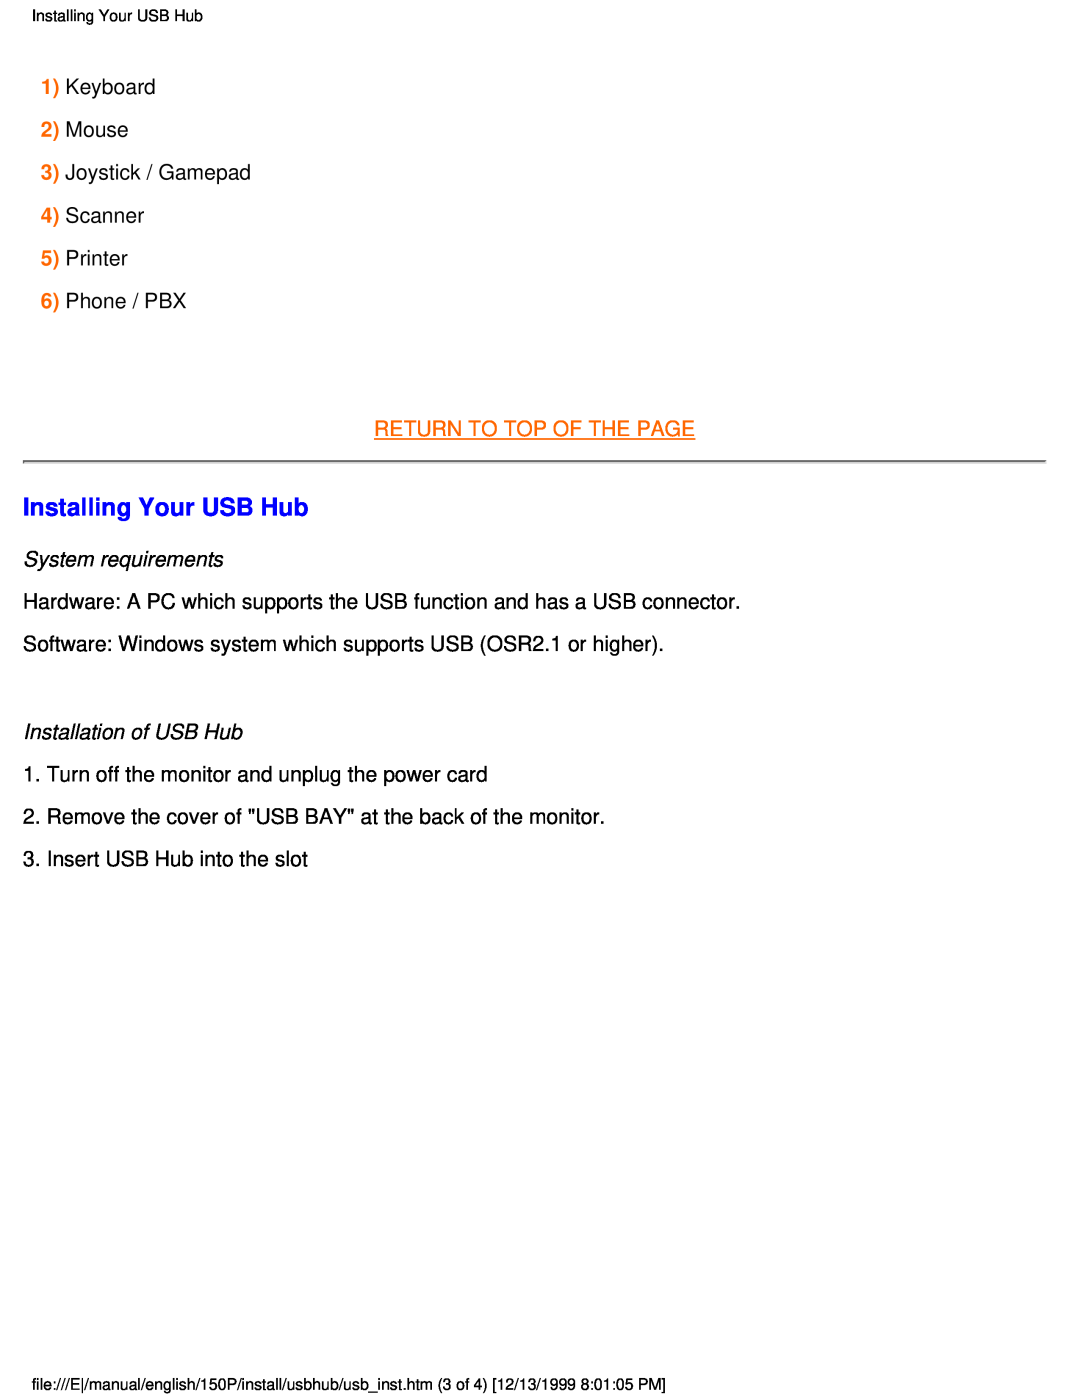 Philips 150P user manual Installing Your USB Hub, Return To Top Of The Page, System requirements, Installation of USB Hub 